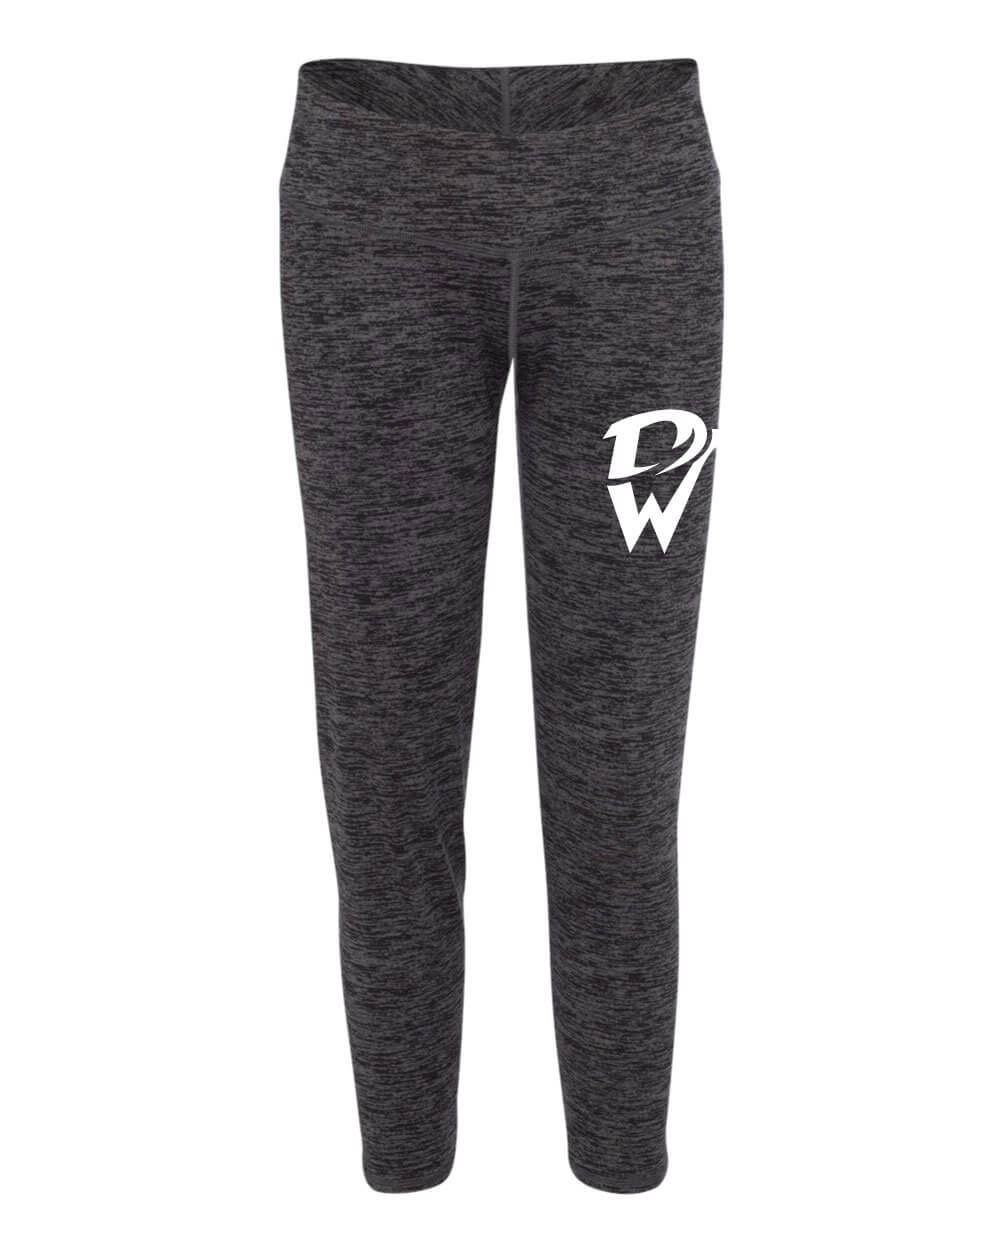 Davenport West Track and Field Leggings